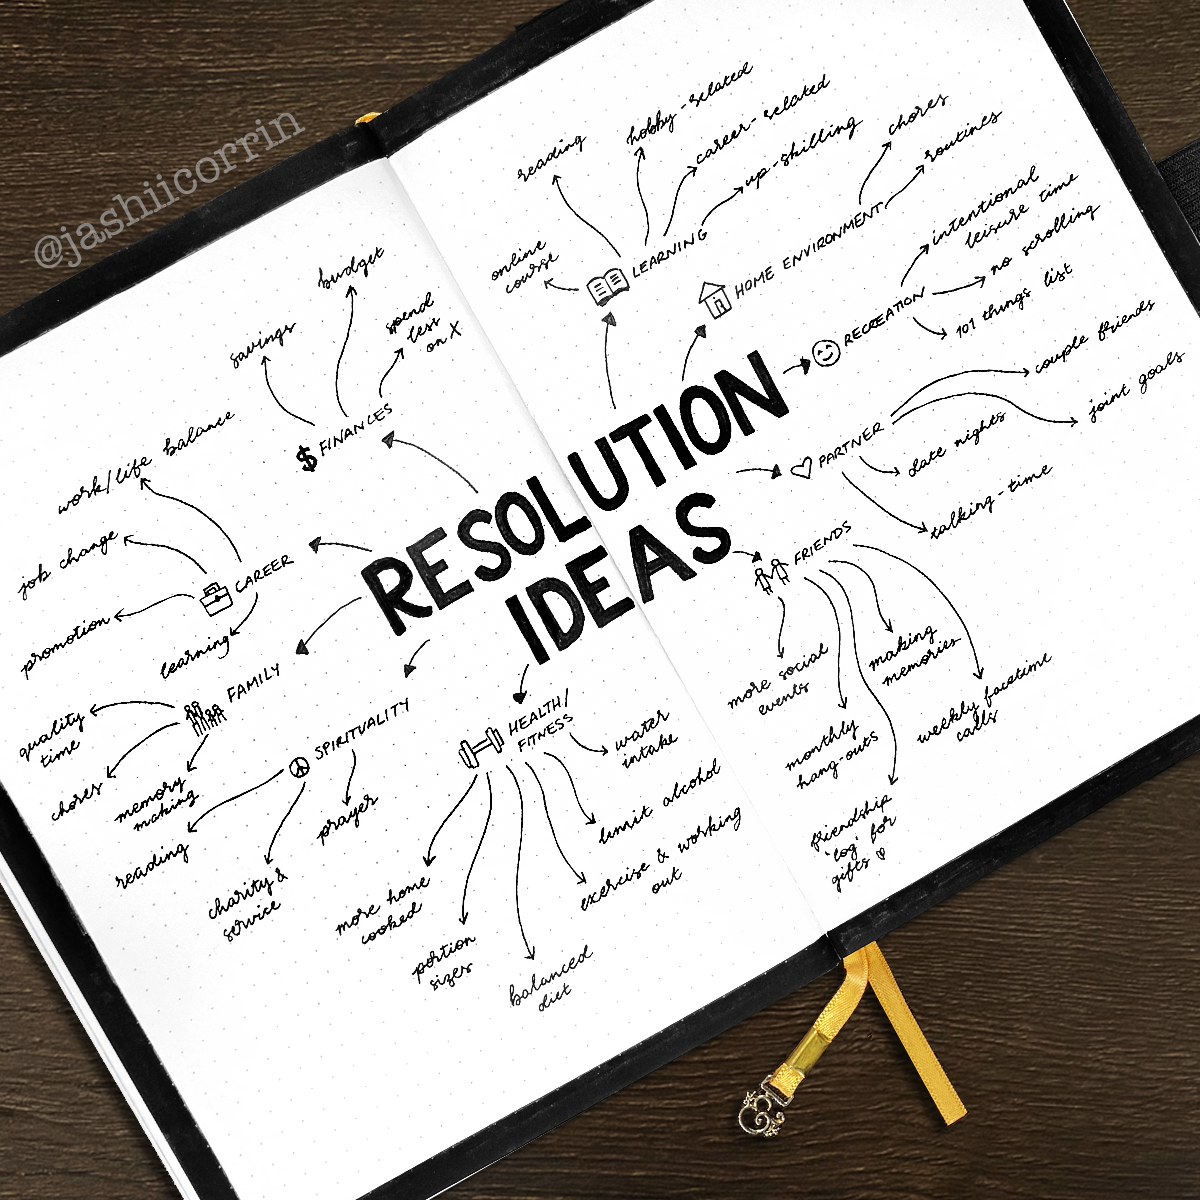 complete brainstorm for resolution ideas